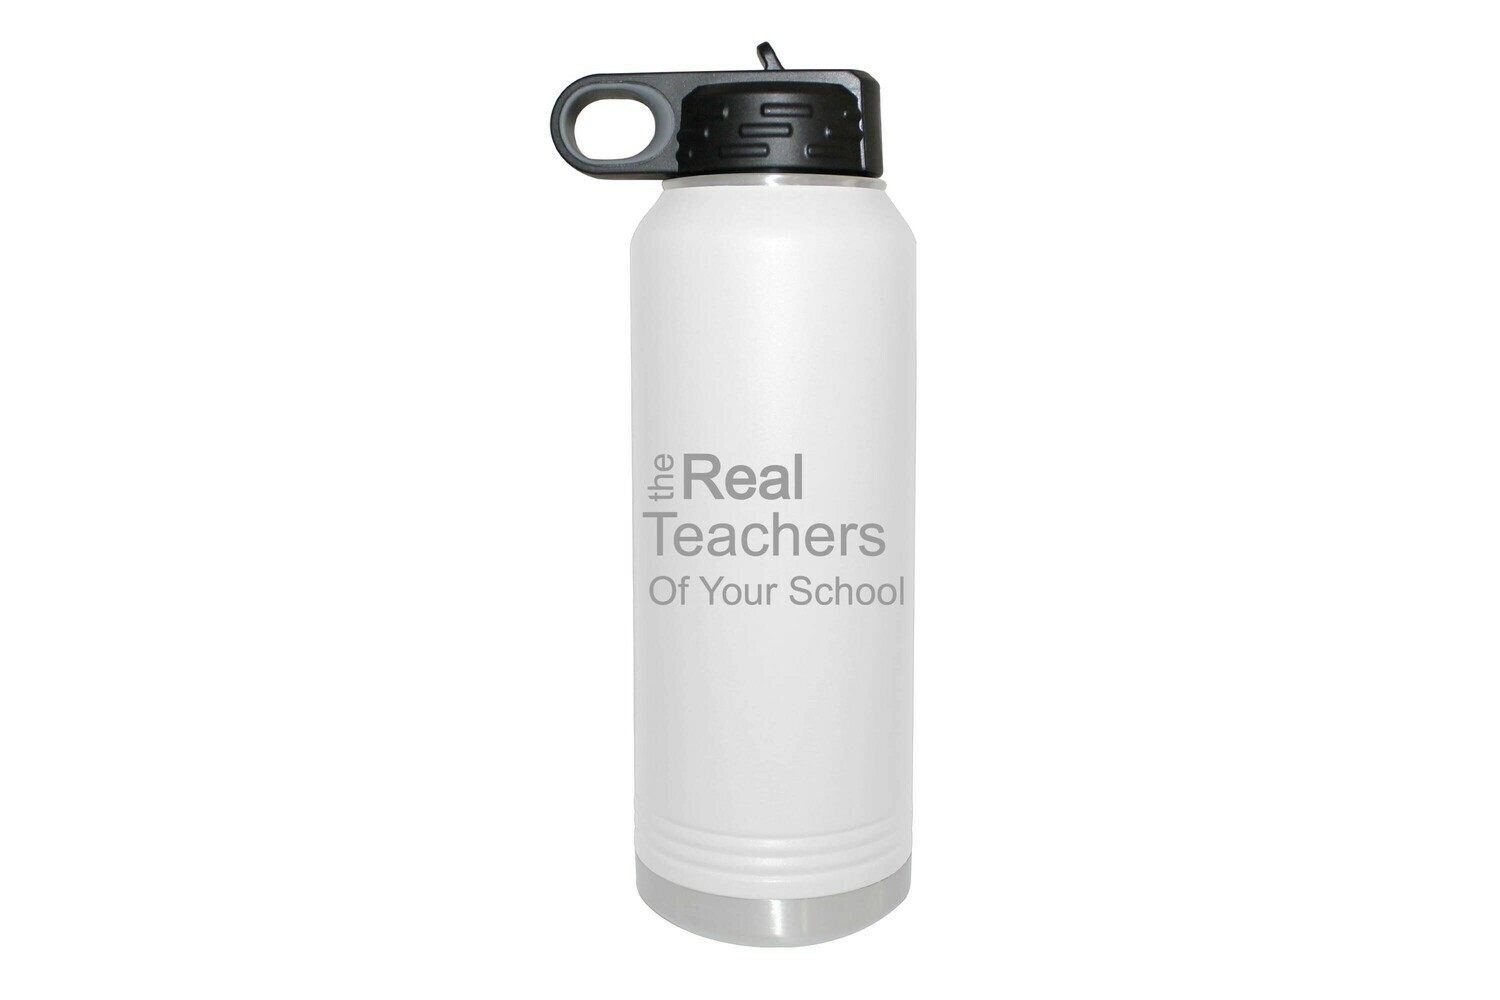 The Real Teachers of (Add Your School) Insulated Water Bottle 32 oz